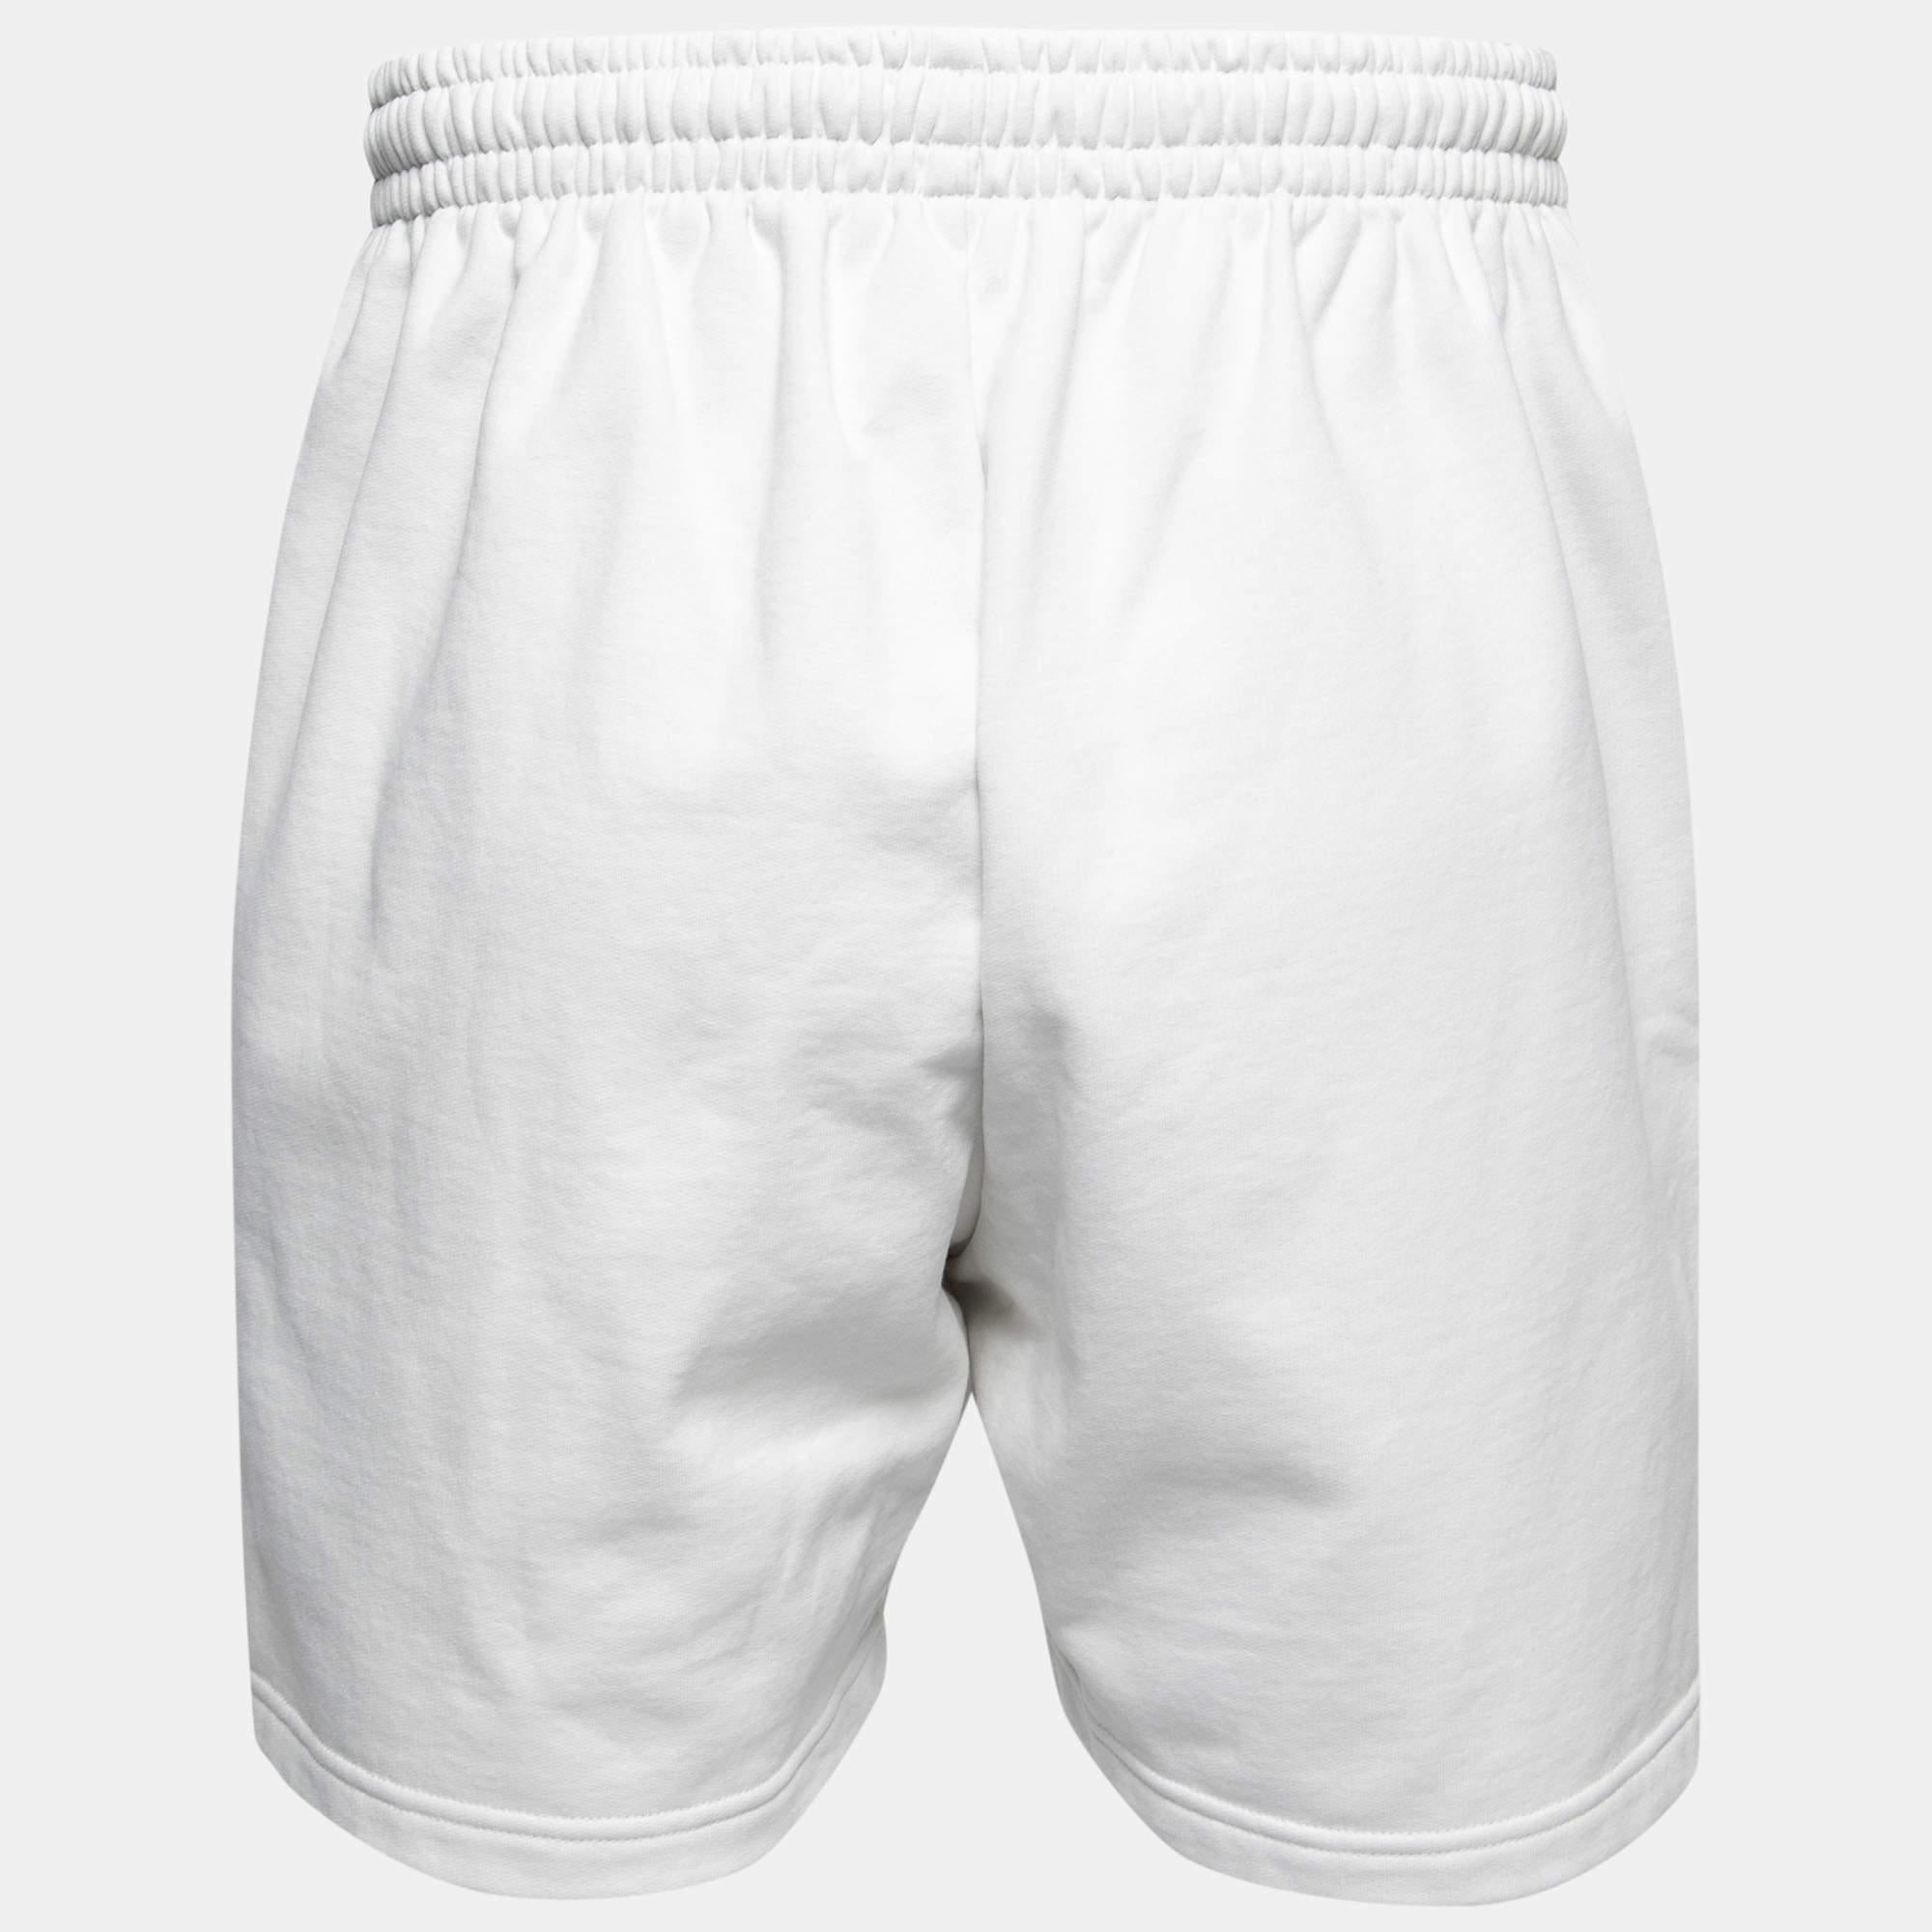 These shorts by Balenciaga are a comfy and stylish pick. They feature a logo and multiple pockets. Easy to style and relaxed in appearance, these shorts will be your favorite!

Includes: Brand Tag
